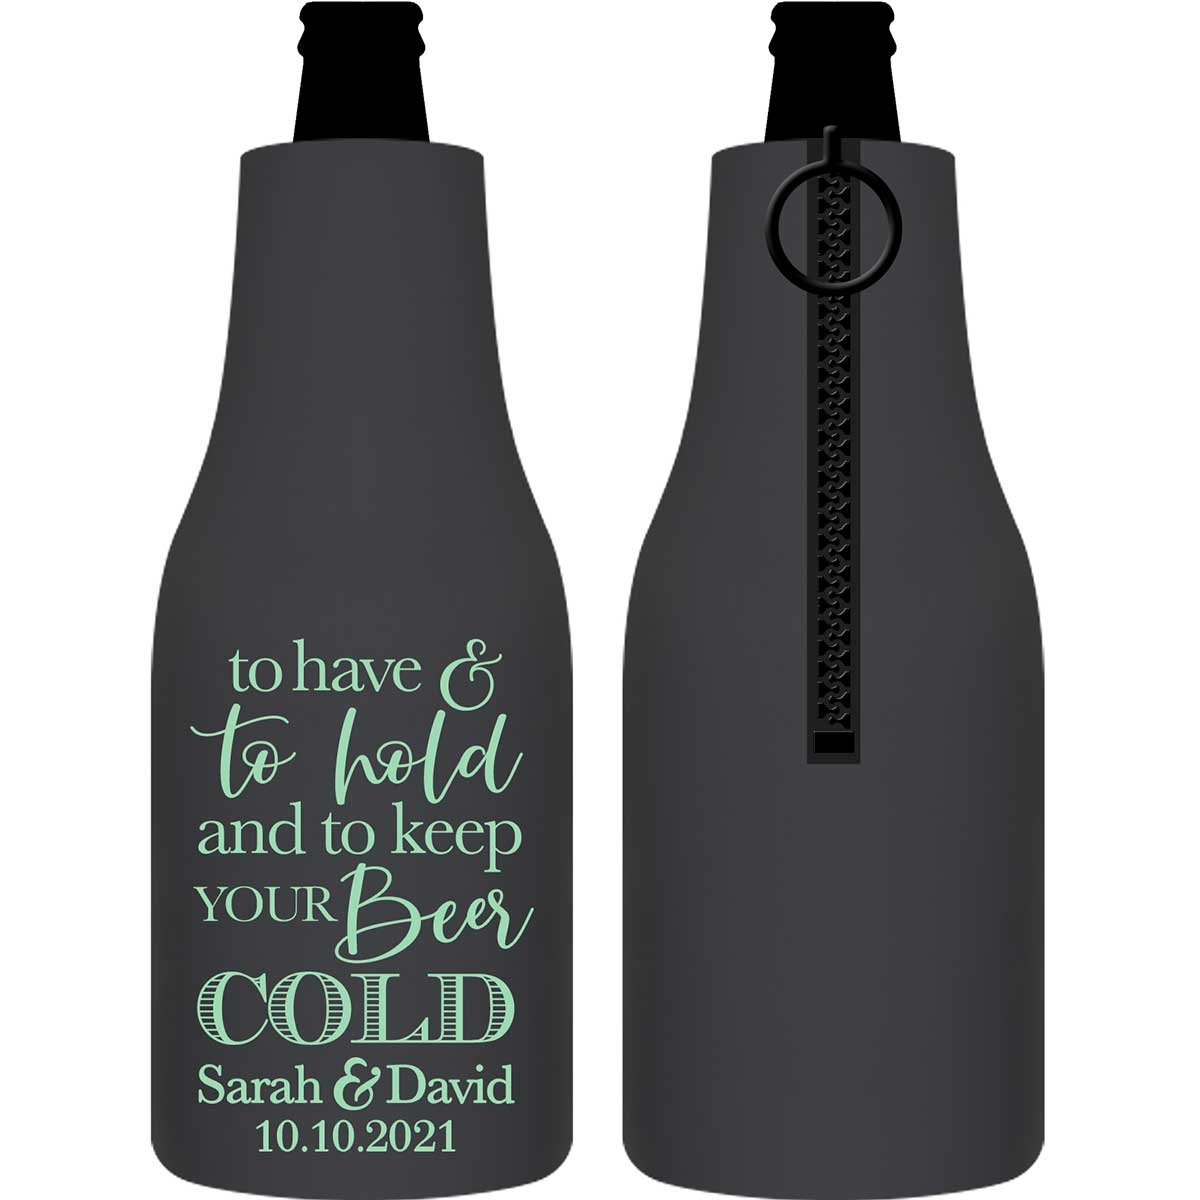 https://www.thatweddingshop.com/wp-content/uploads/2020/01/To-Have-And-To-Hold-Keep-Your-Beer-Cold-2A-Collapsible-Foam-Zippered-Bottle-Koozies-Personalized-Wedding-Favors.jpg